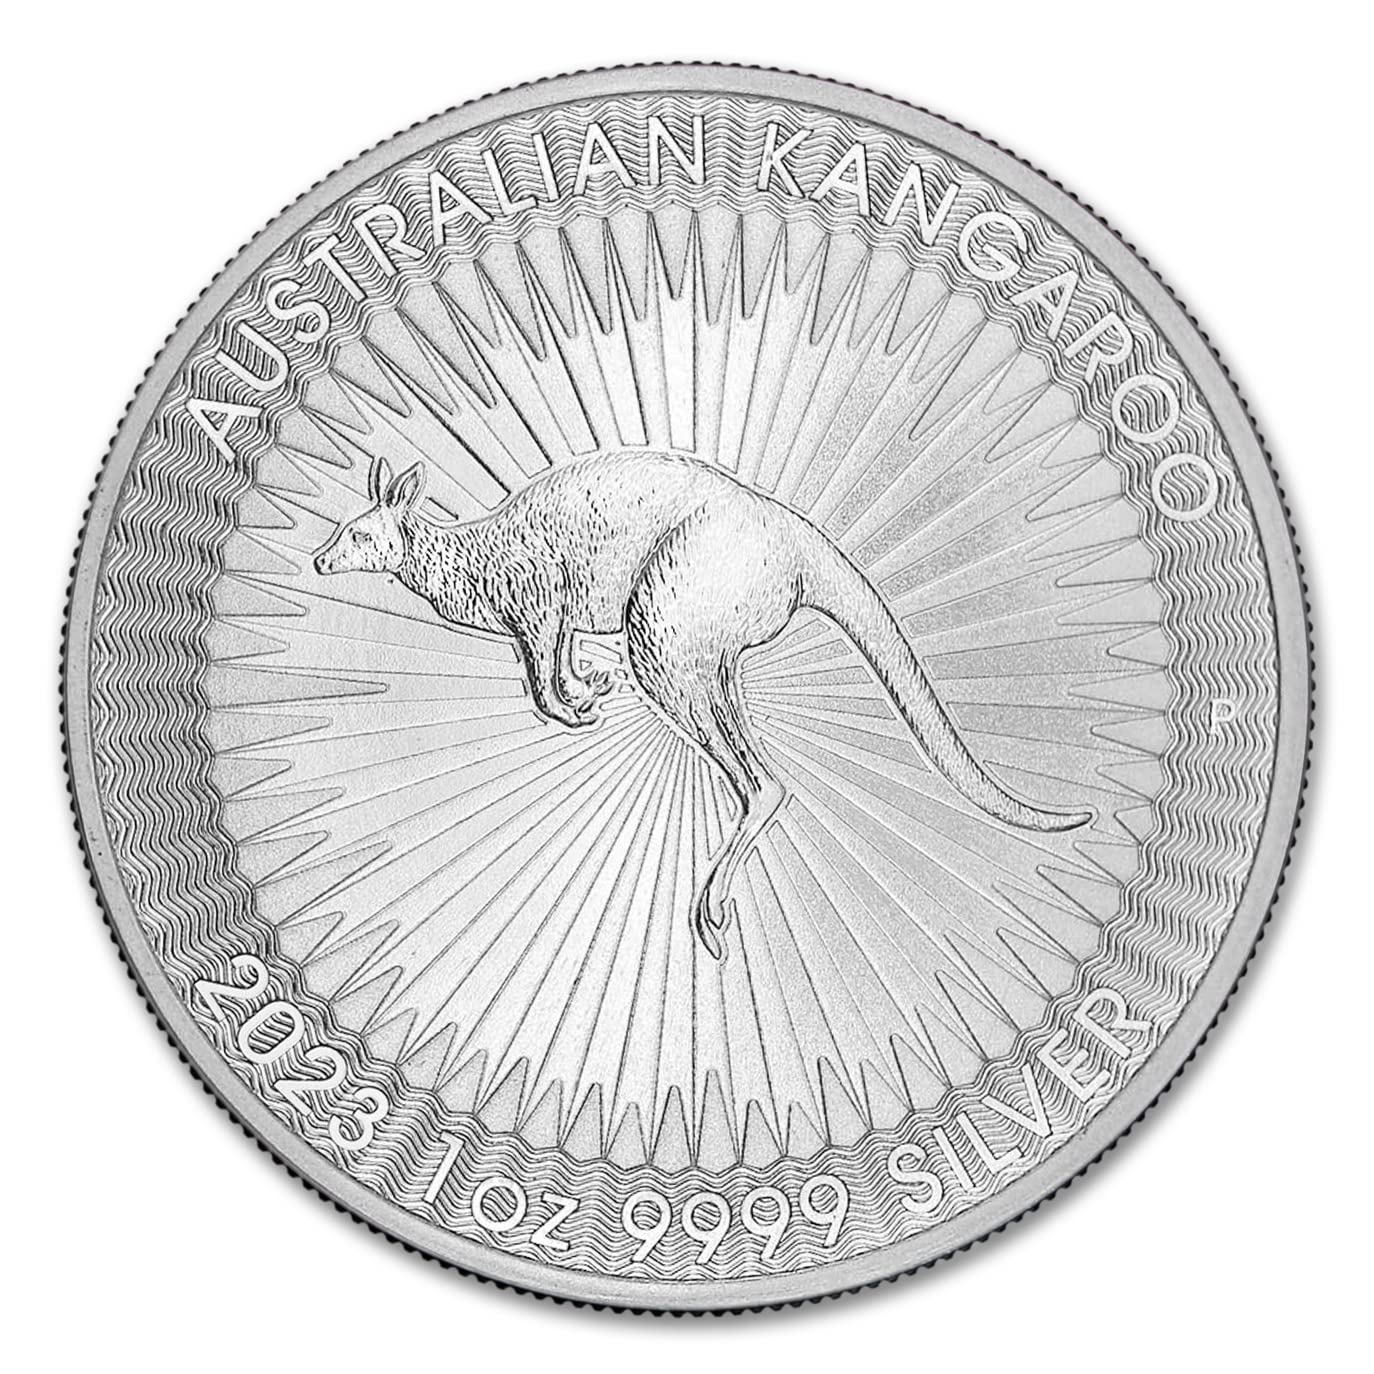 2023 P 1 oz Australian Kangaroo Silver Bullion Coin Brilliant Uncirculated with Certificate of Authenticity $1 Seller BU